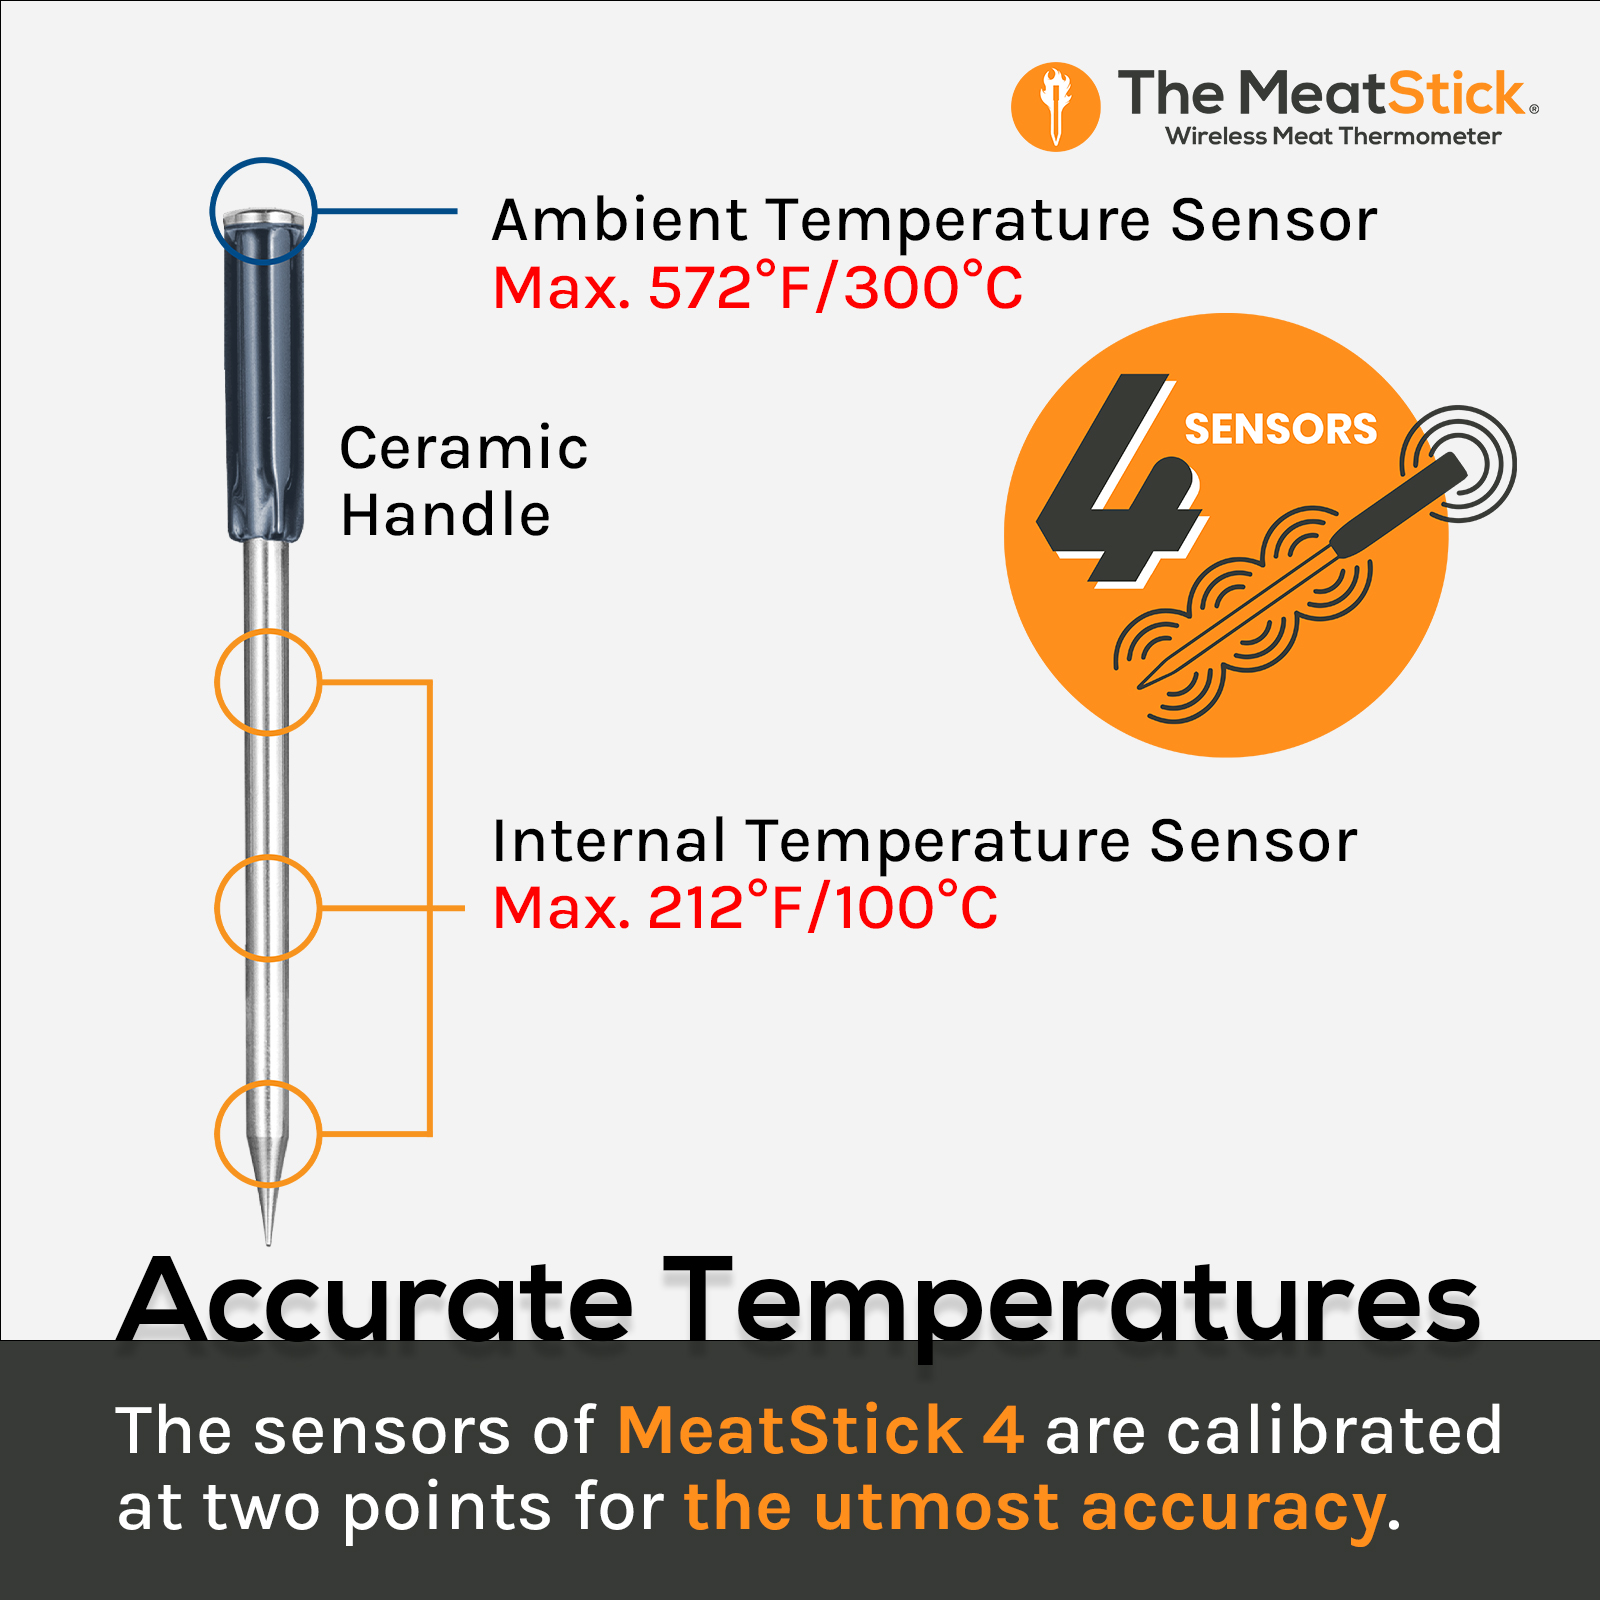 The MeatStick 4X quad sensors find the meat's TruTemp™ by locating the lowest internal temp for hassle-free and accurate readings.